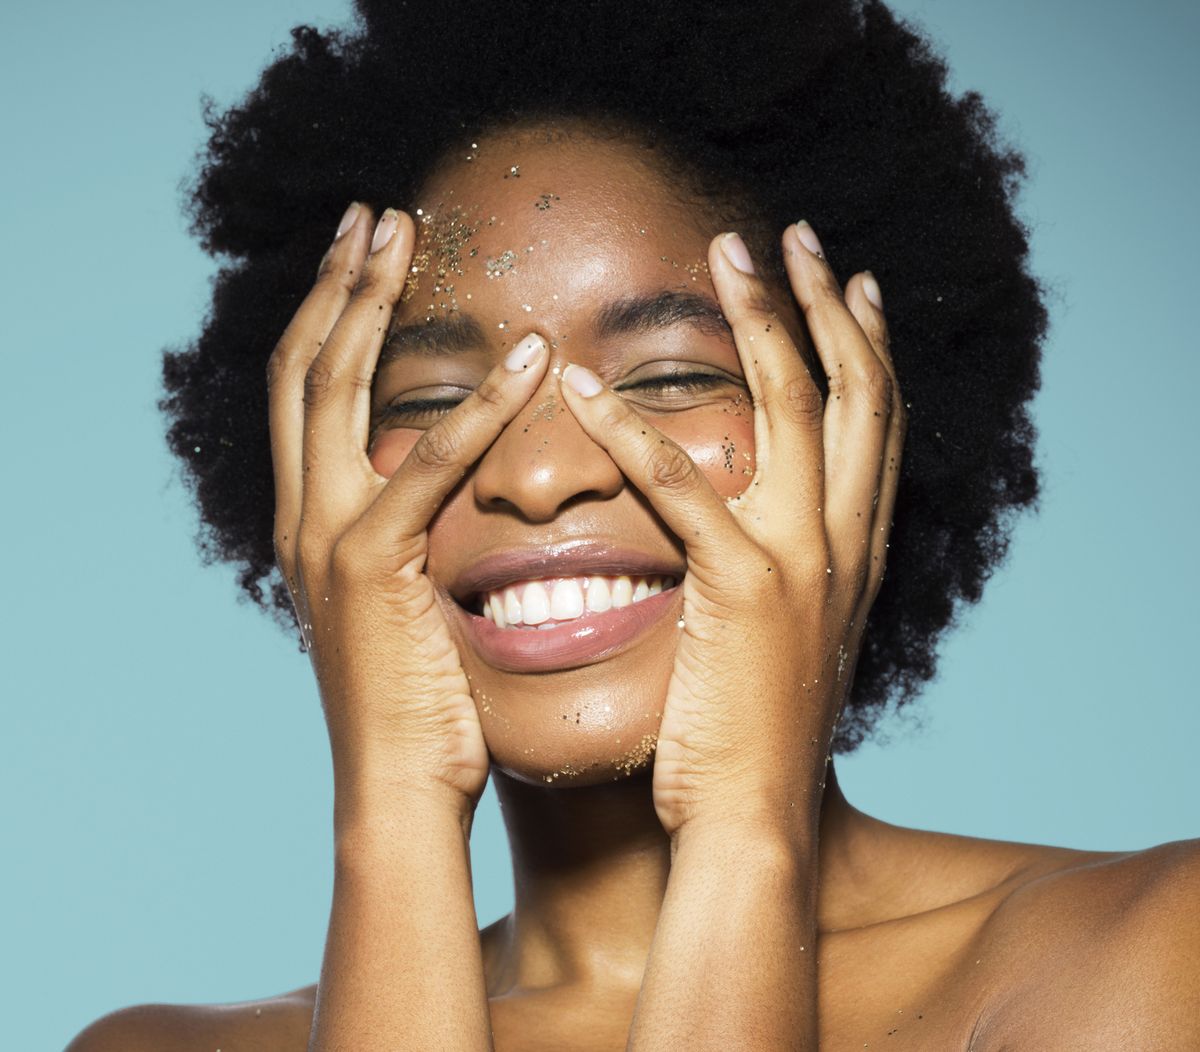 How To Get Rid Of Laugh And Smile Lines: 5 Expert Tips